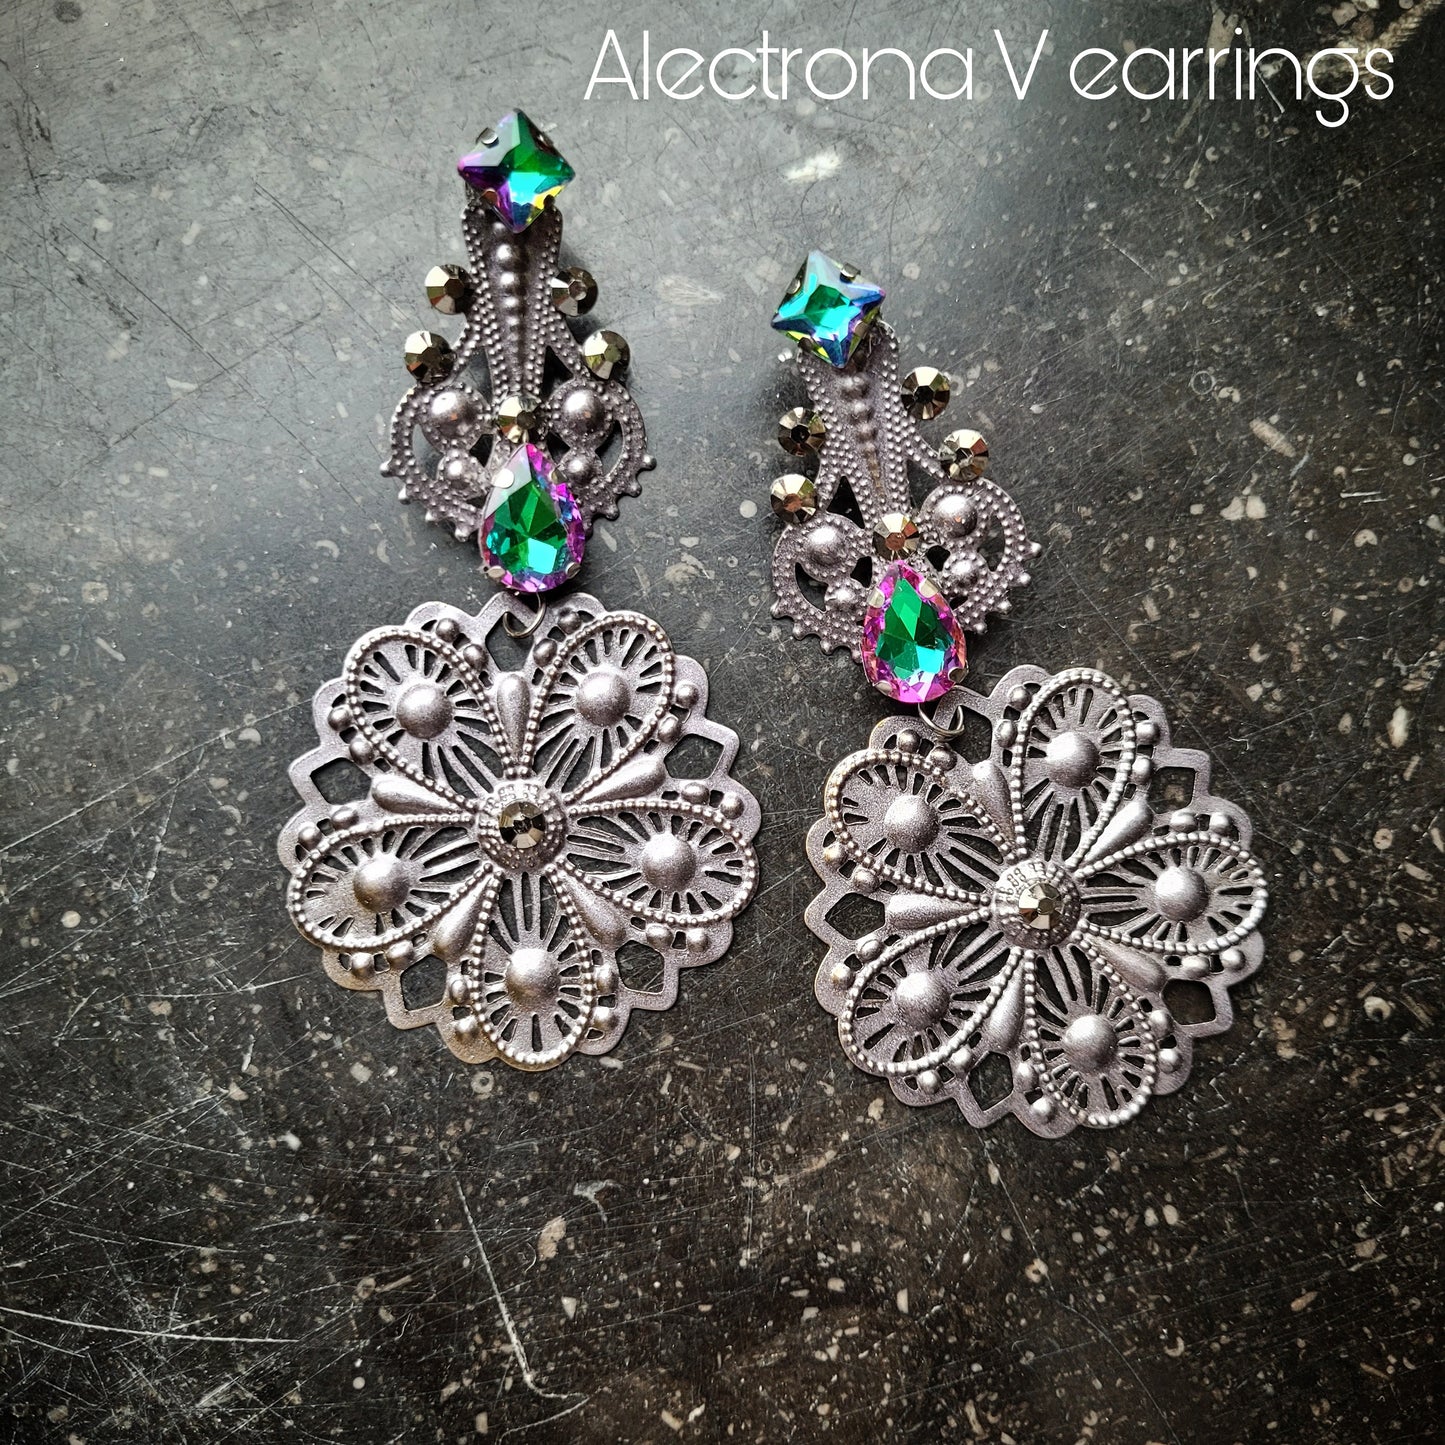 Deusa ex Machina collection: The Alectrona earrings (stud versions)